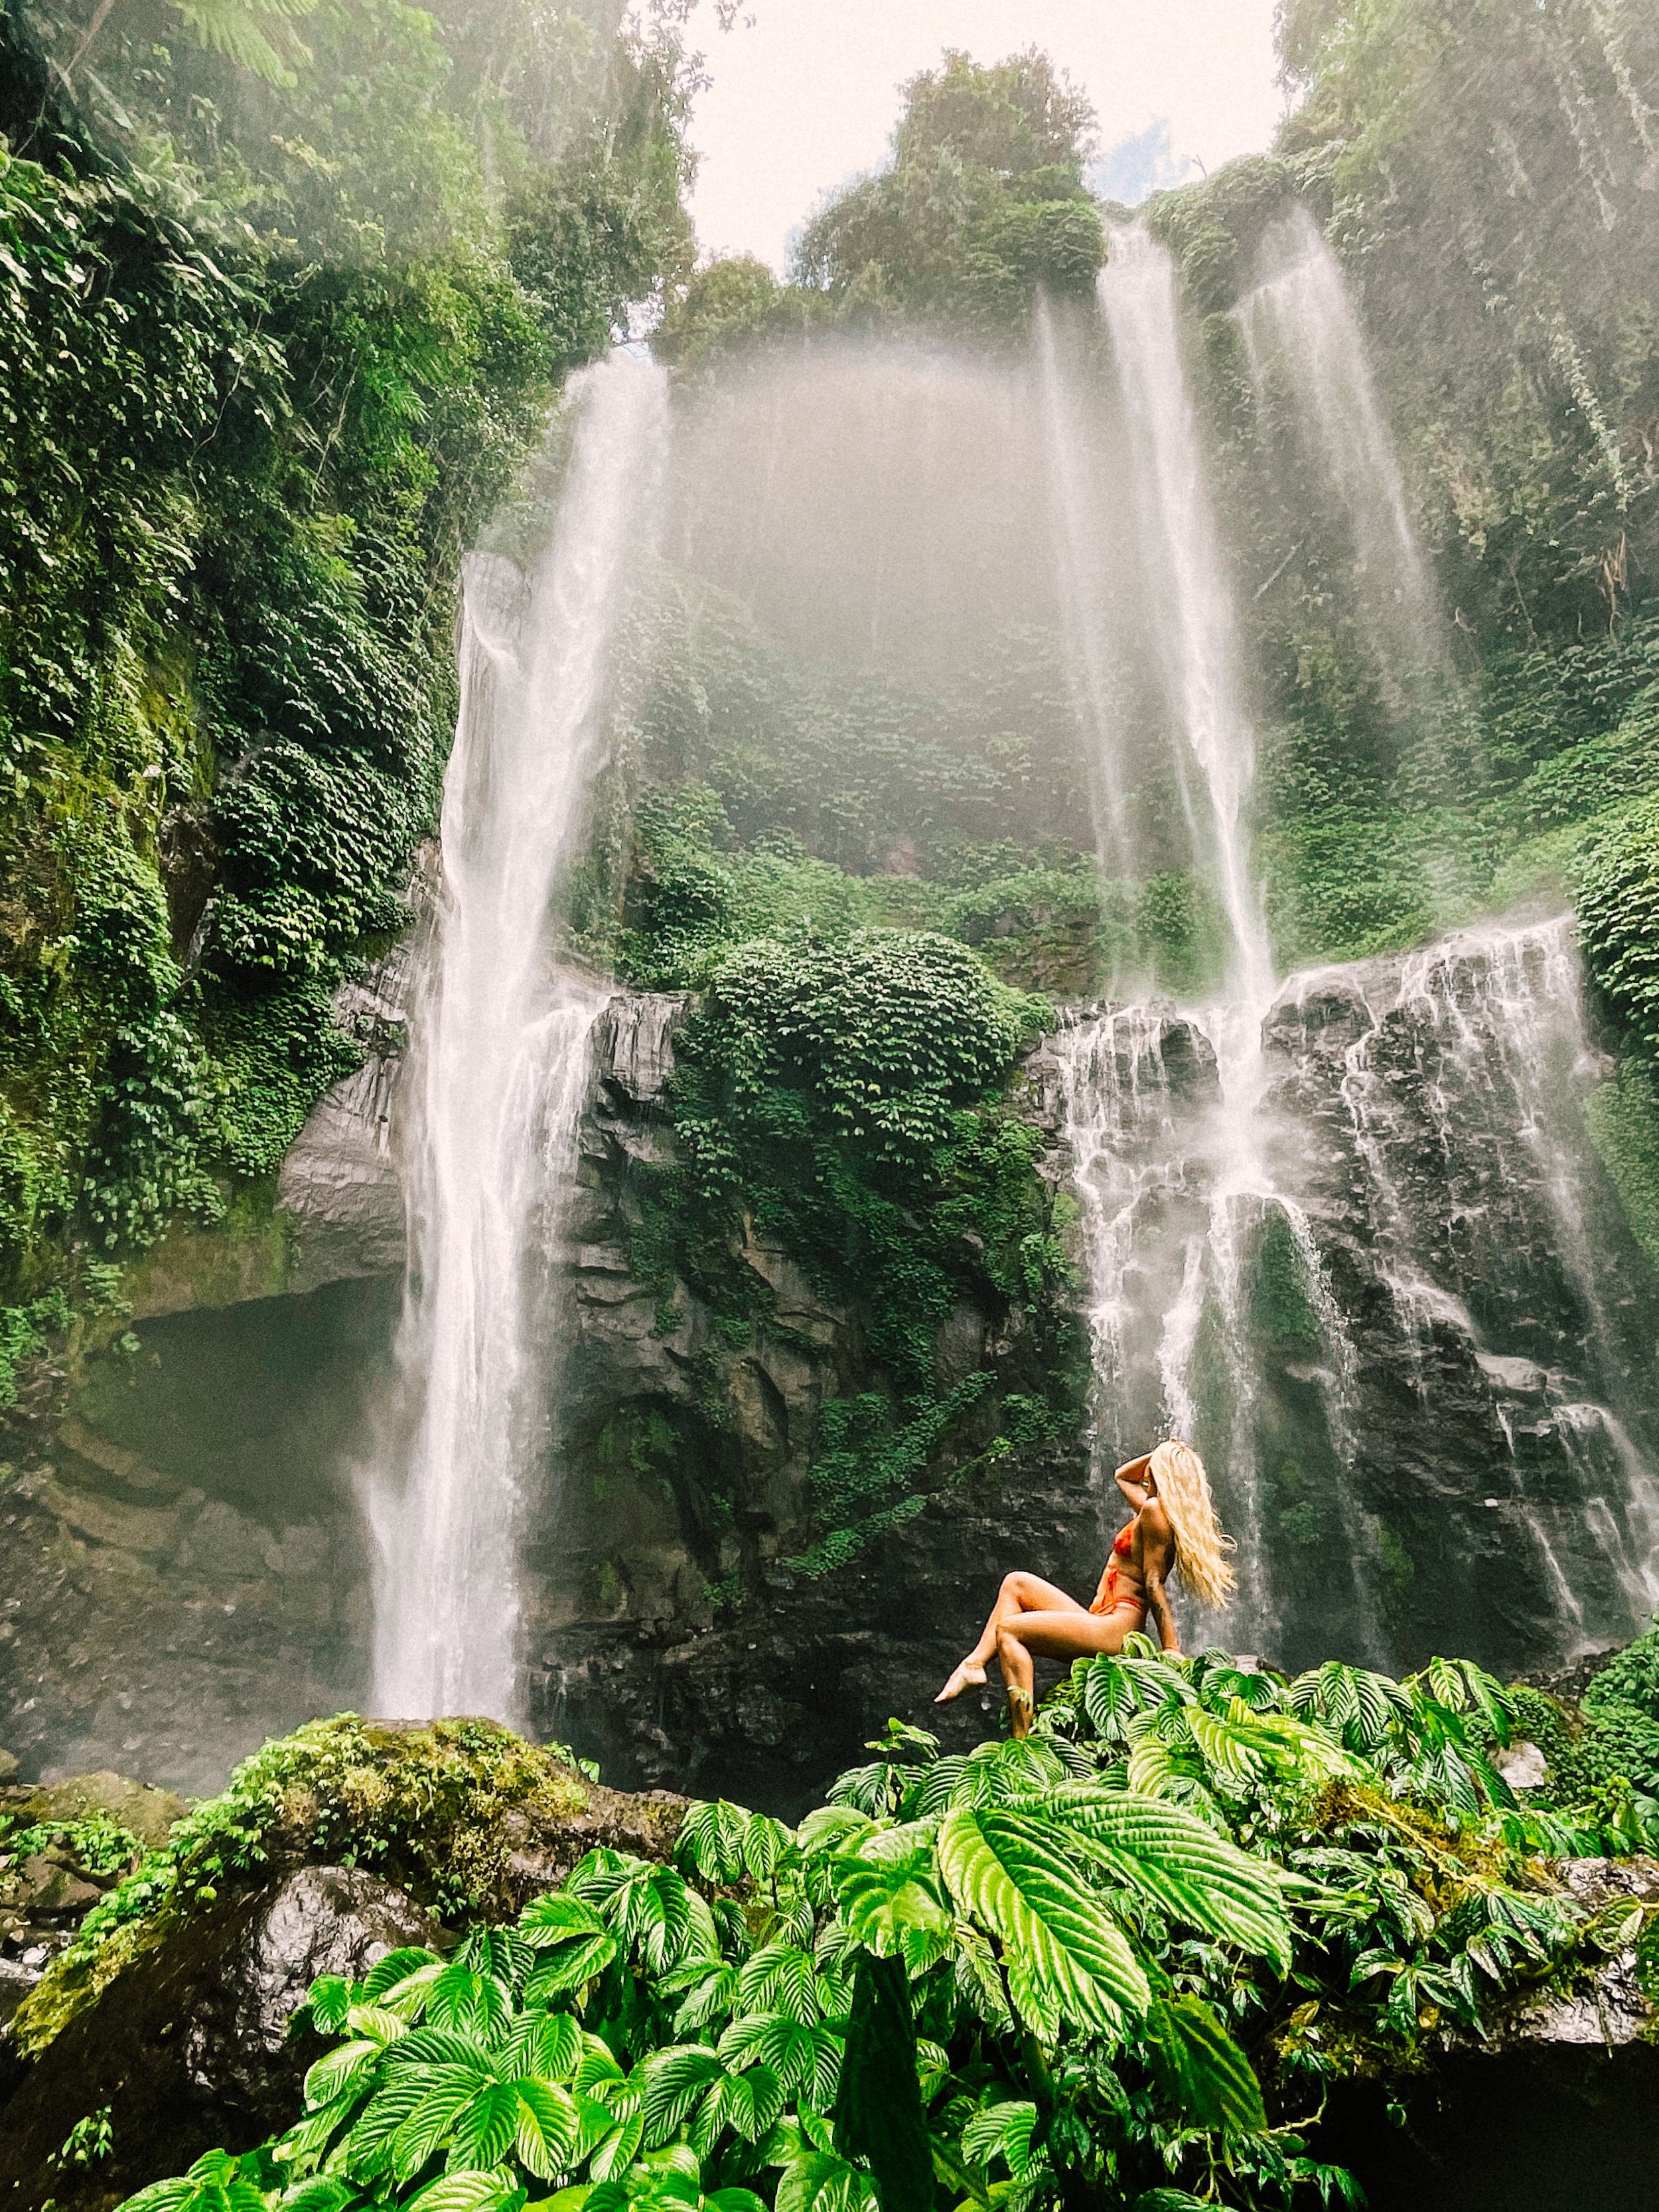 The ULTIMATE 3 Week Bali Itinerary: How To Spend 3 Weeks in Bali